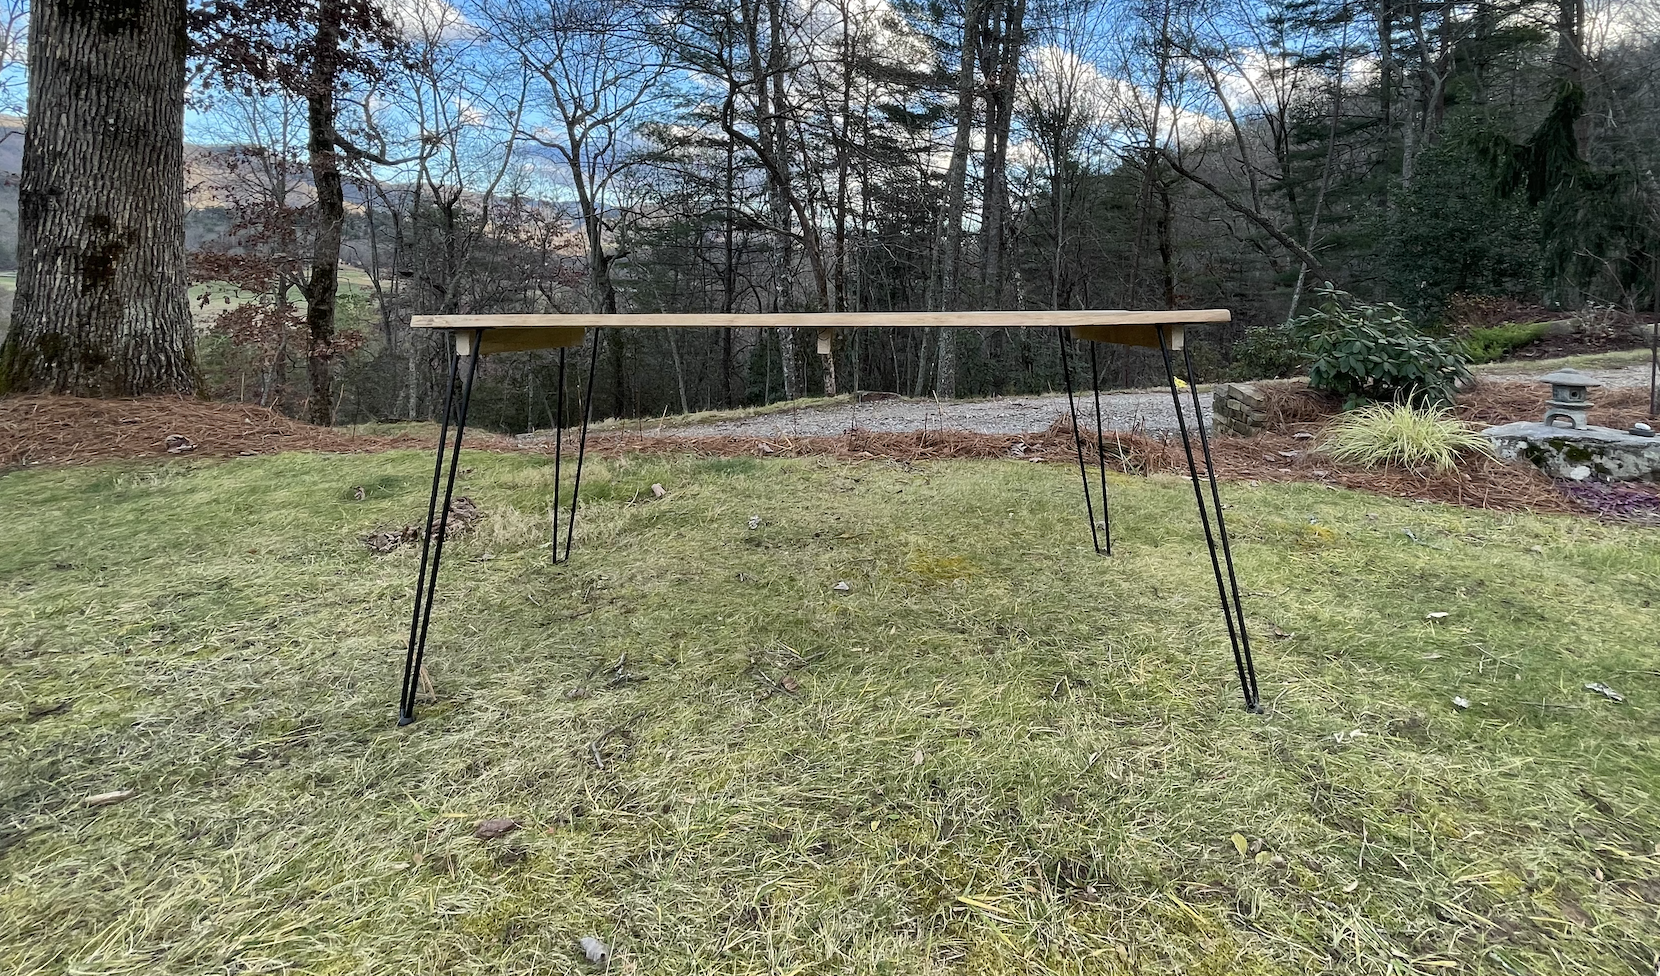 Looking to add modern rustic flair to your eating area? Check out our dining table with a handcrafted maple top and hairpin legs. This table is great for seating 6 or more guests for a meal, games or fellowship, and the wooden top is food-safe and smooth to the touch!